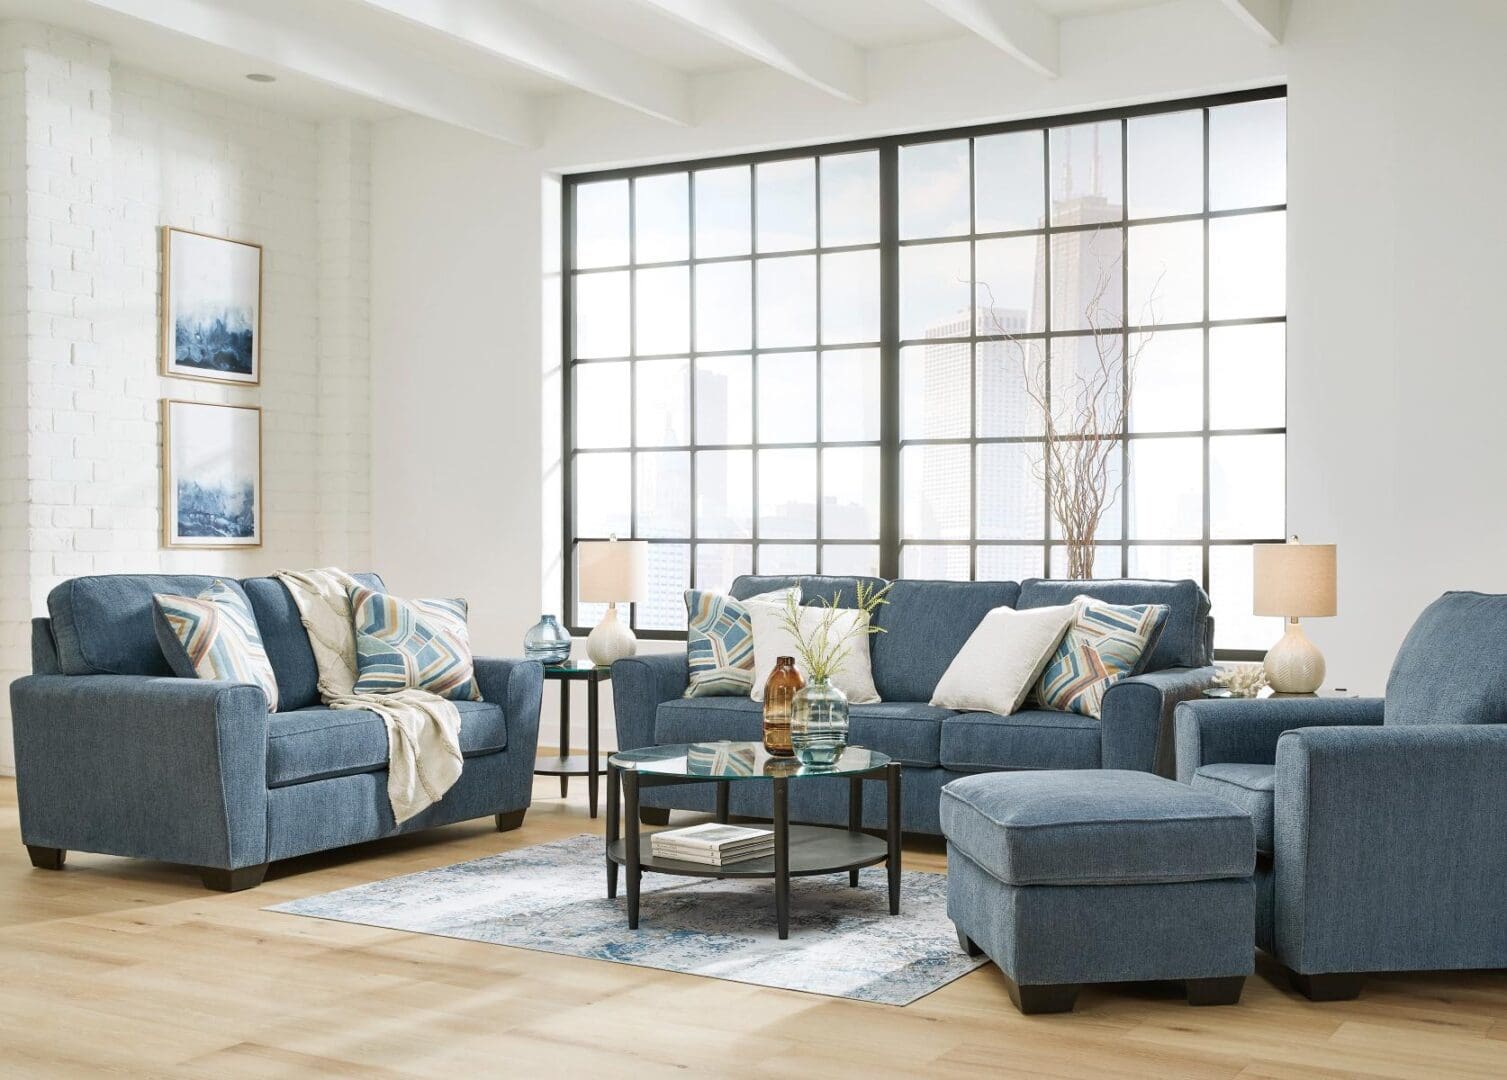 A living room with blue furniture and large windows.